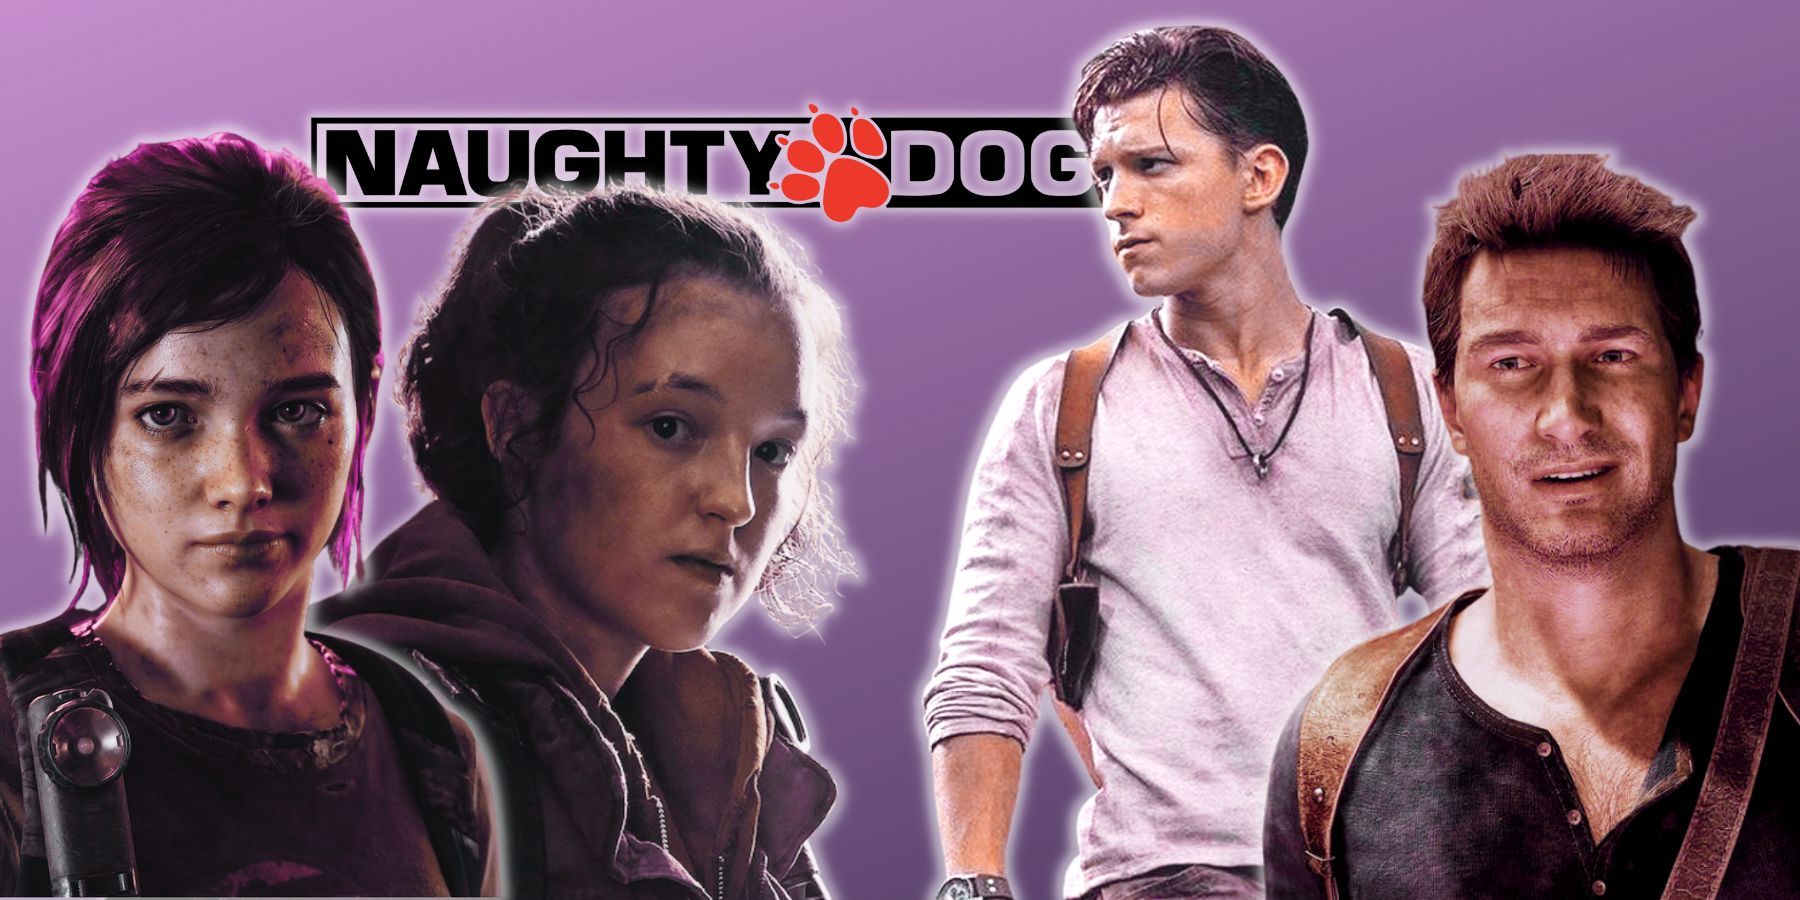 uncharted-vs-the-last-of-us-naughty-dog-adaptations-feature-nathan-drake-ellie-williams